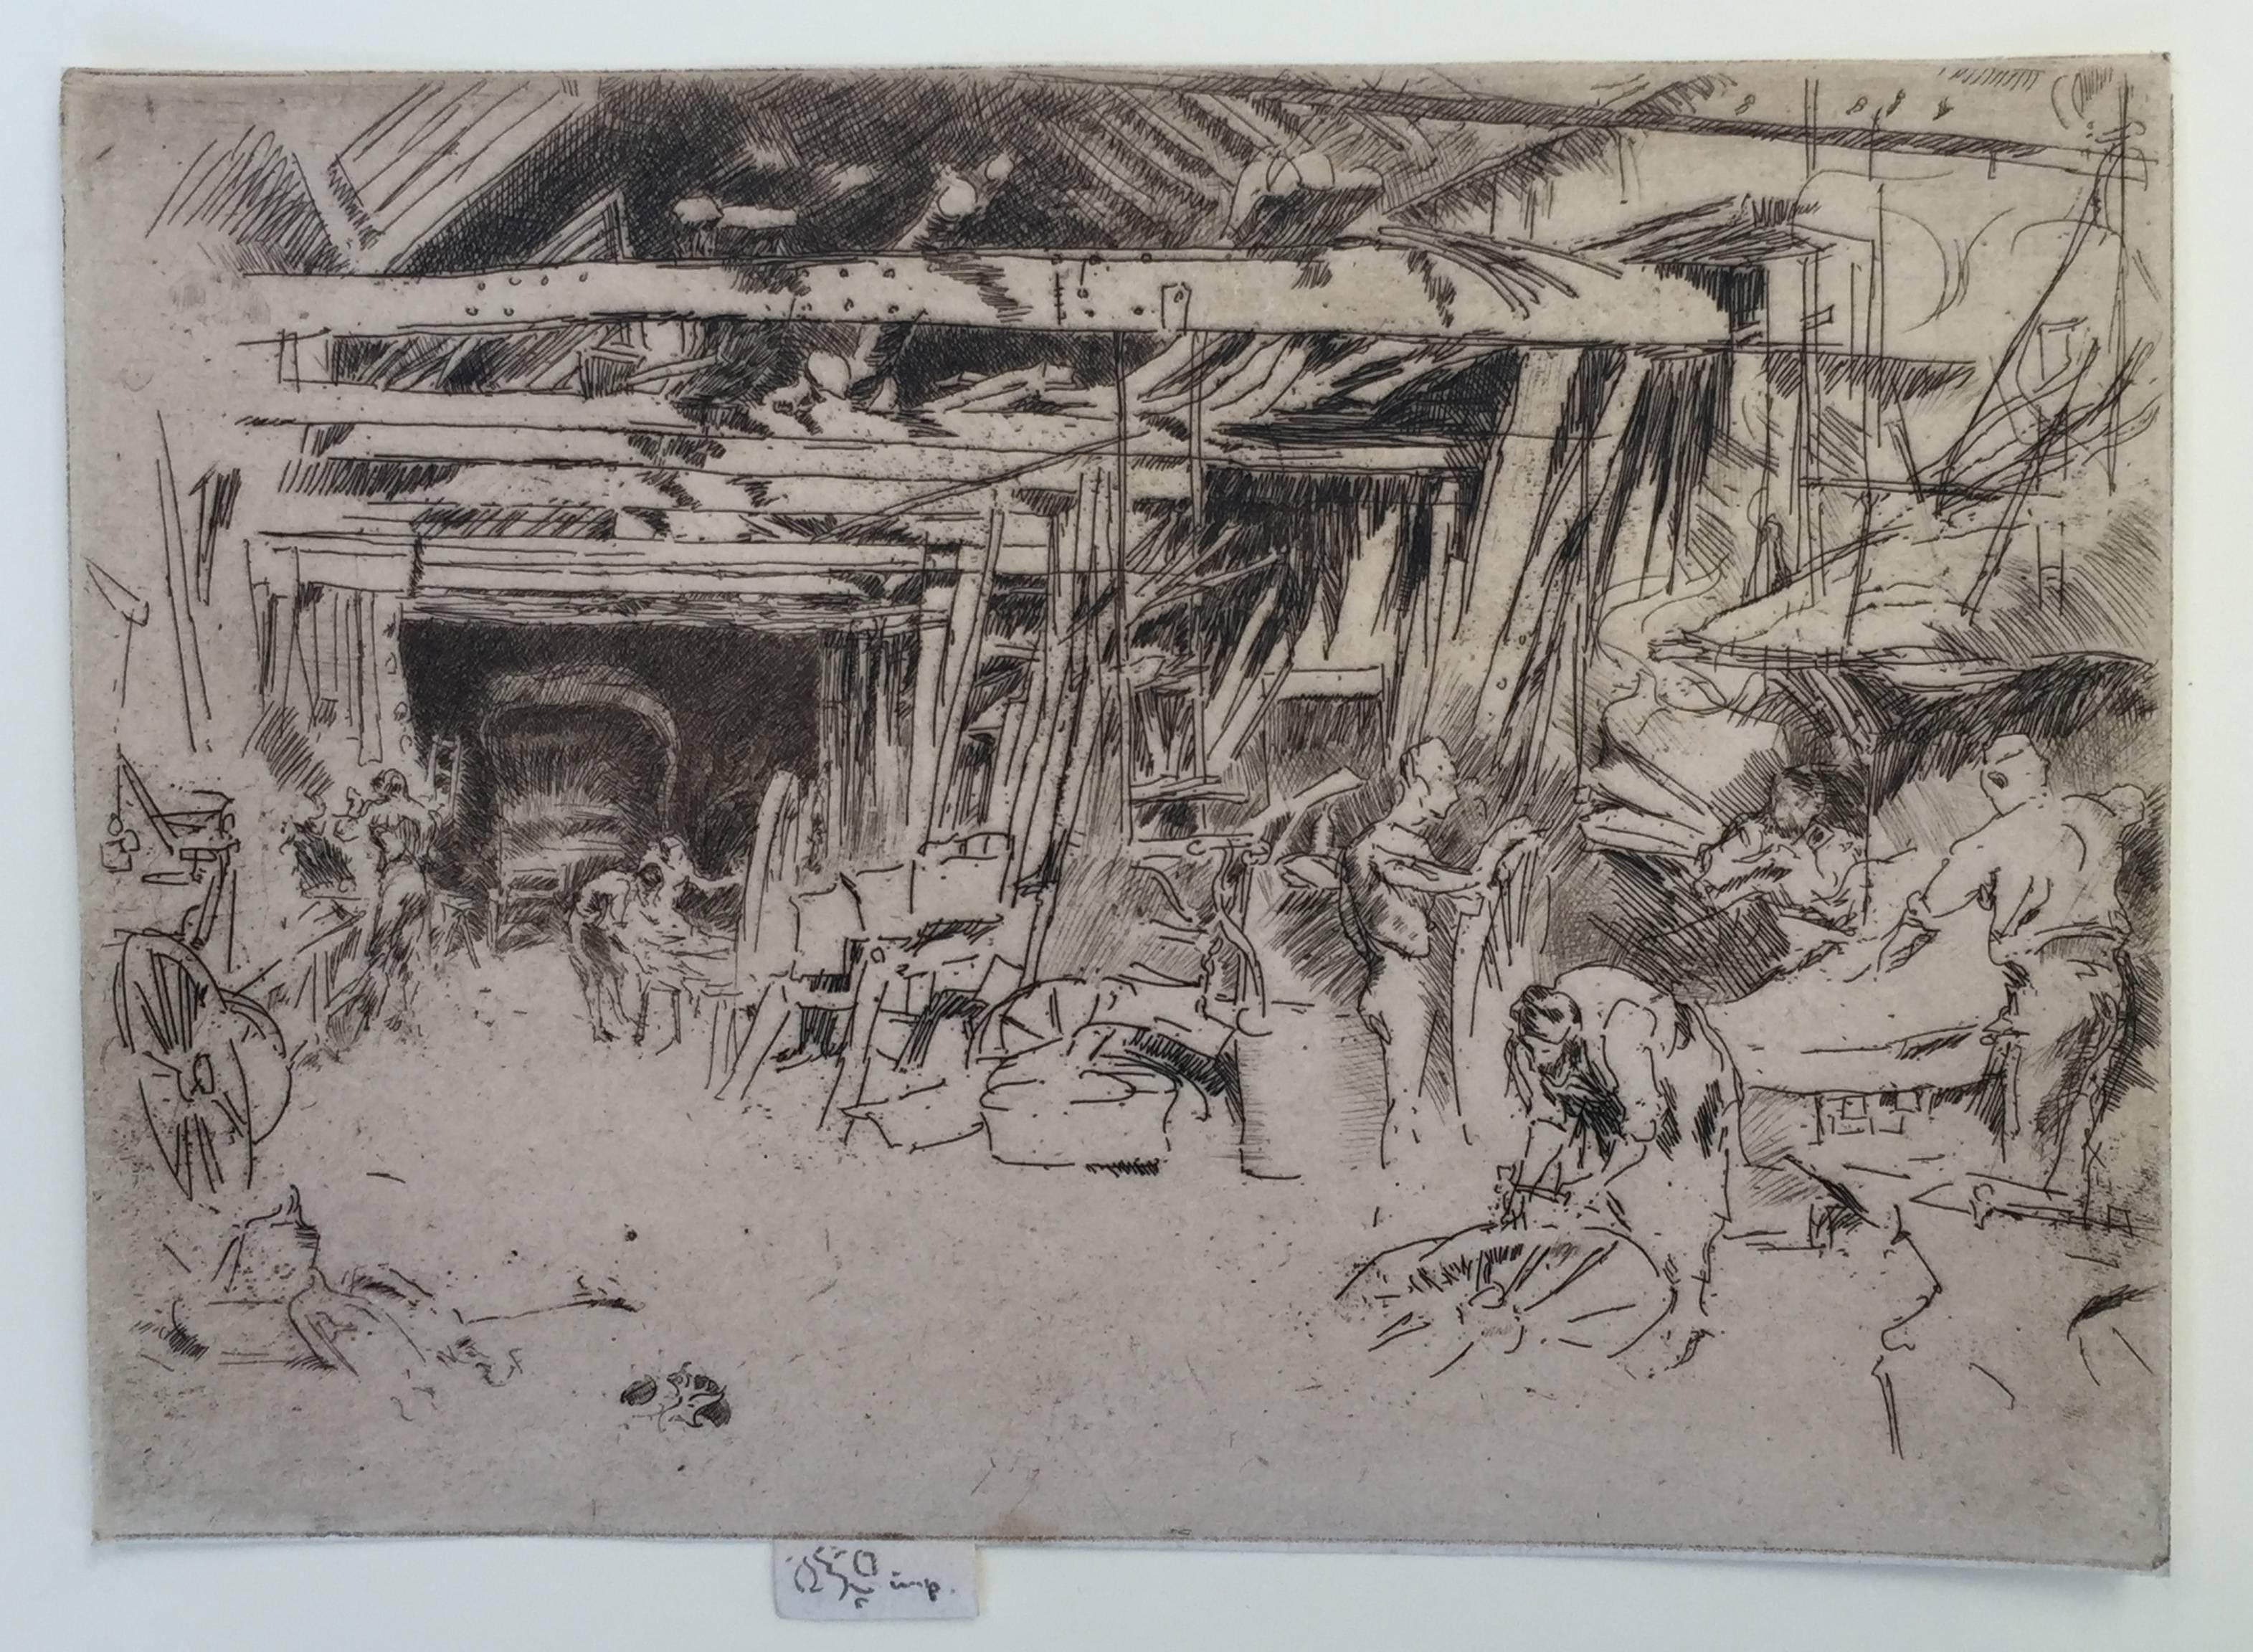 JAMES ABBOTT McNEILL WHISTLER  (1834 – 1903)

          WHEELWRIGHT, 1880 (G.240 vi/ix)
          Signed with butterfly and imp. on tab. Trimmed margins as usual. The 
          butterfly still printing in the upper left beam. On pro patria